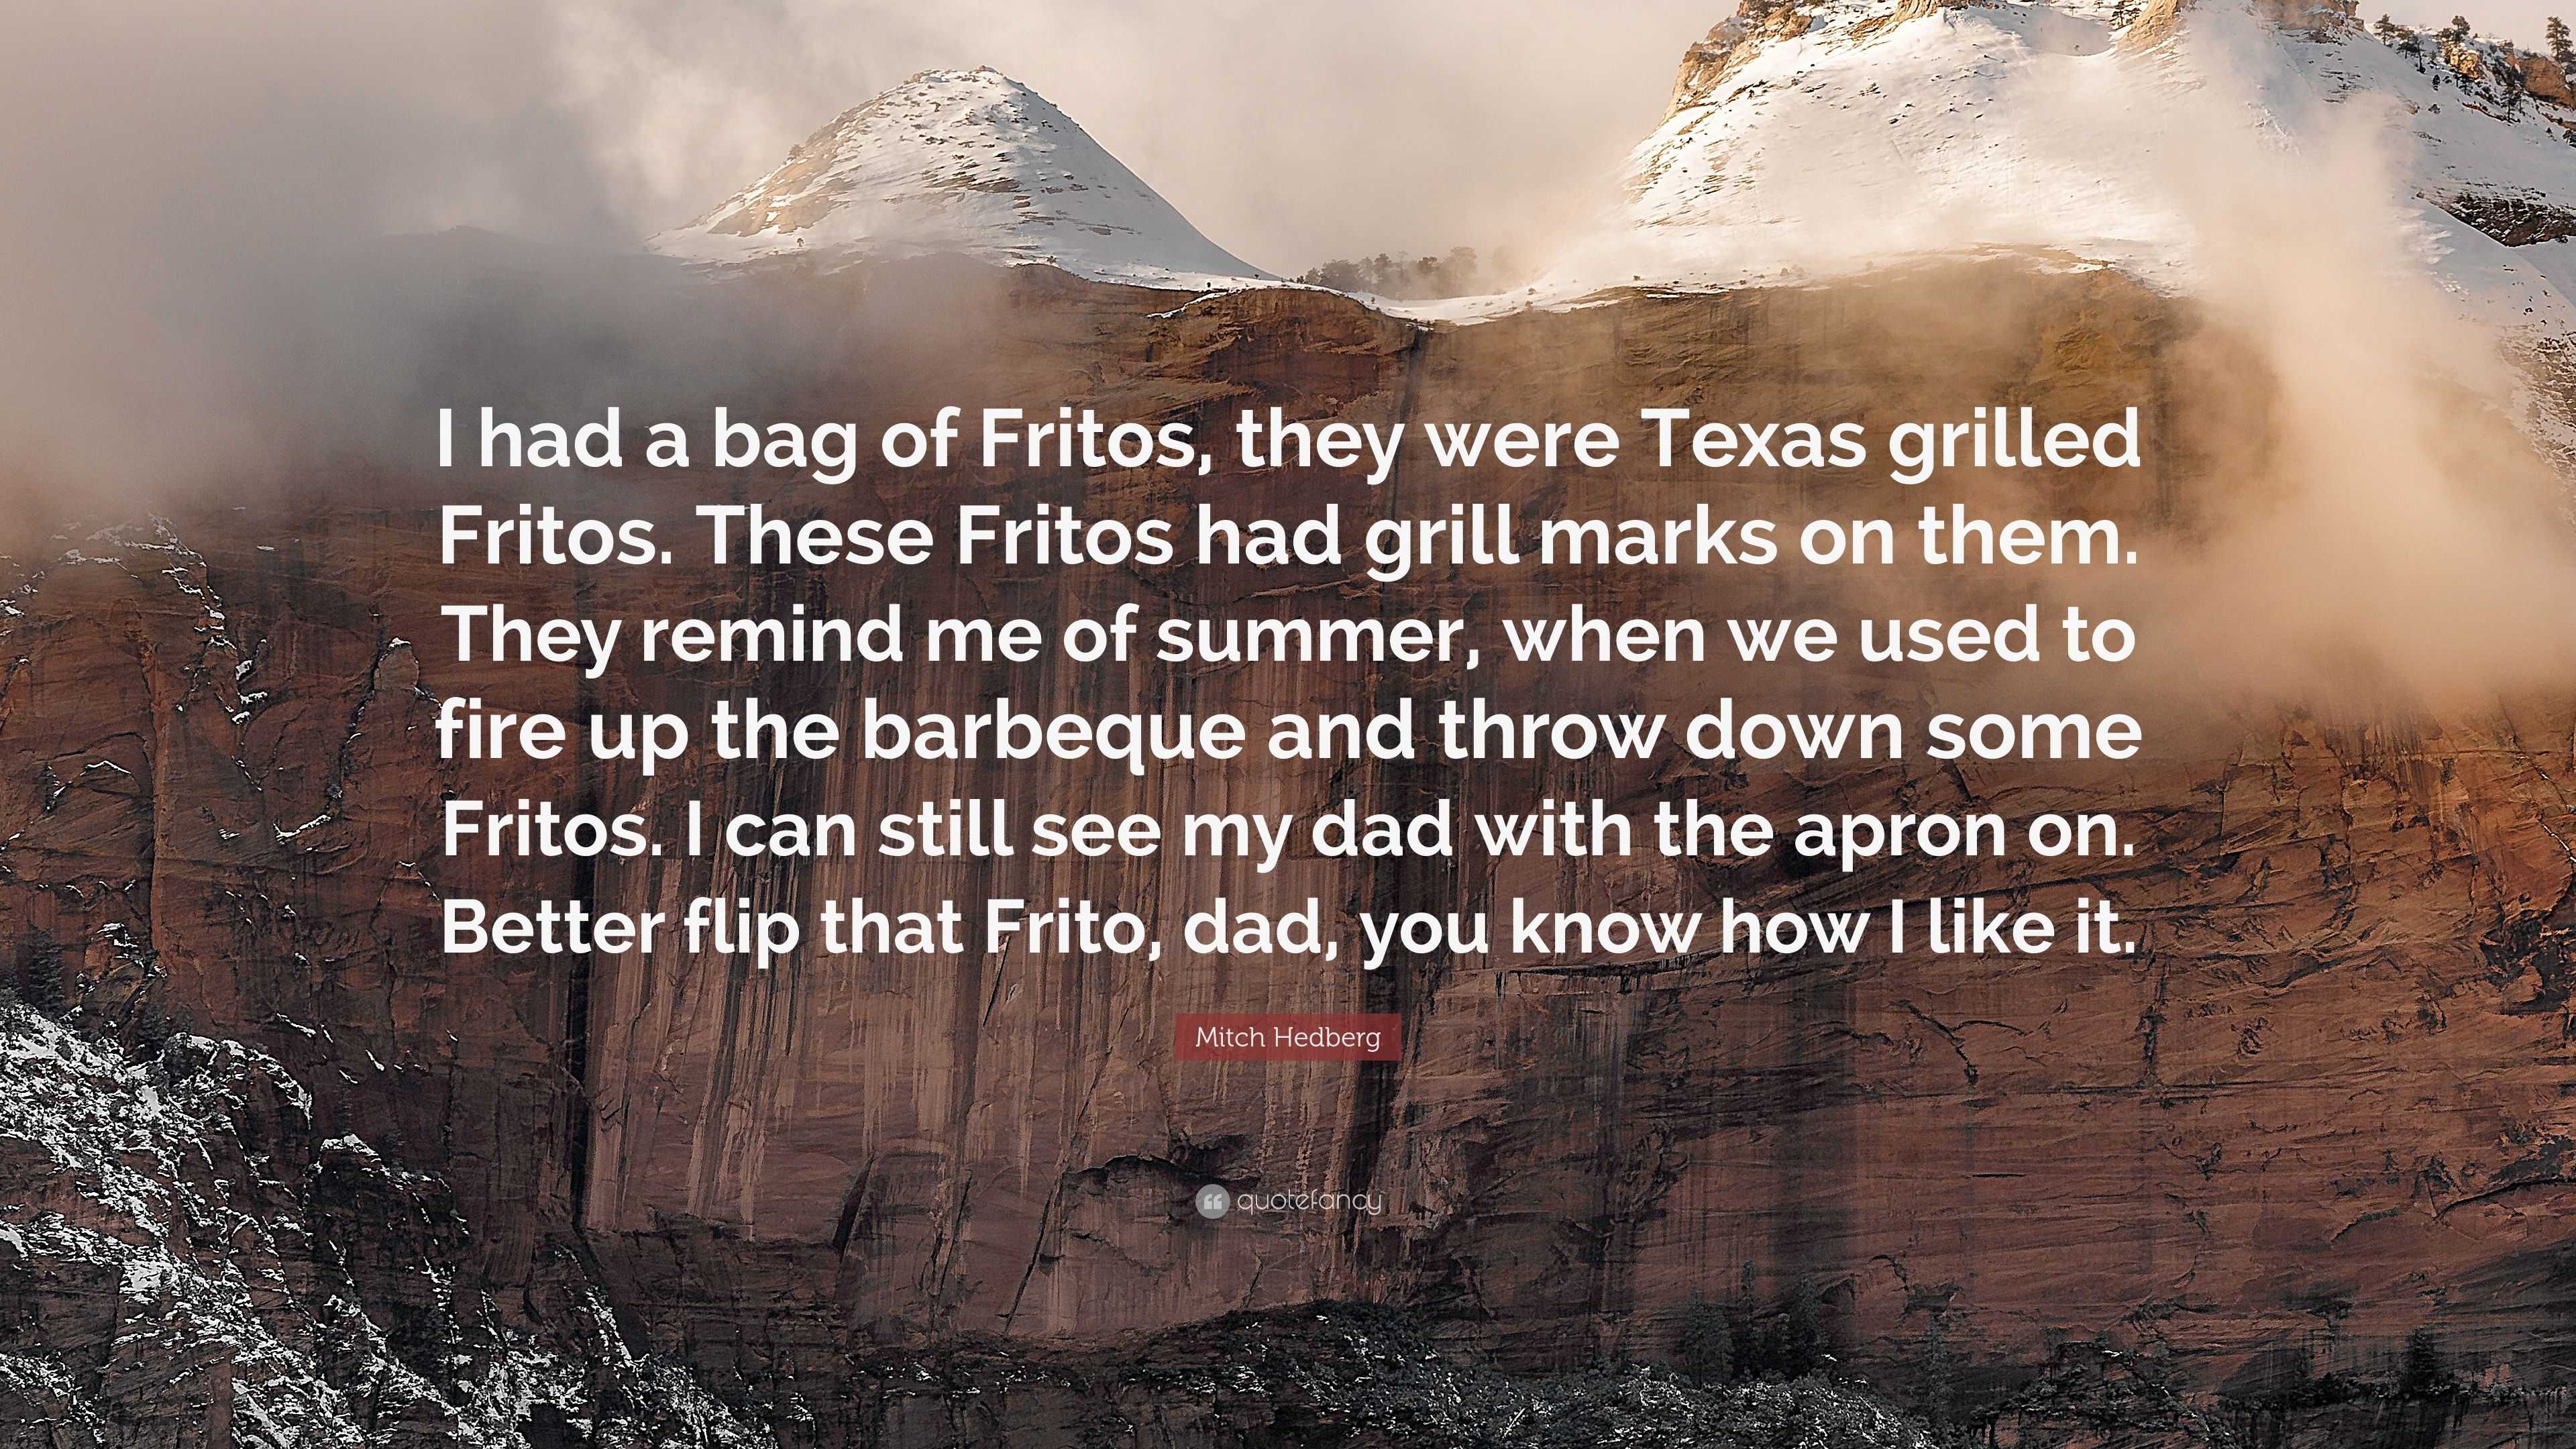 https://quotefancy.com/media/wallpaper/3840x2160/4222962-Mitch-Hedberg-Quote-I-had-a-bag-of-Fritos-they-were-Texas-grilled.jpg